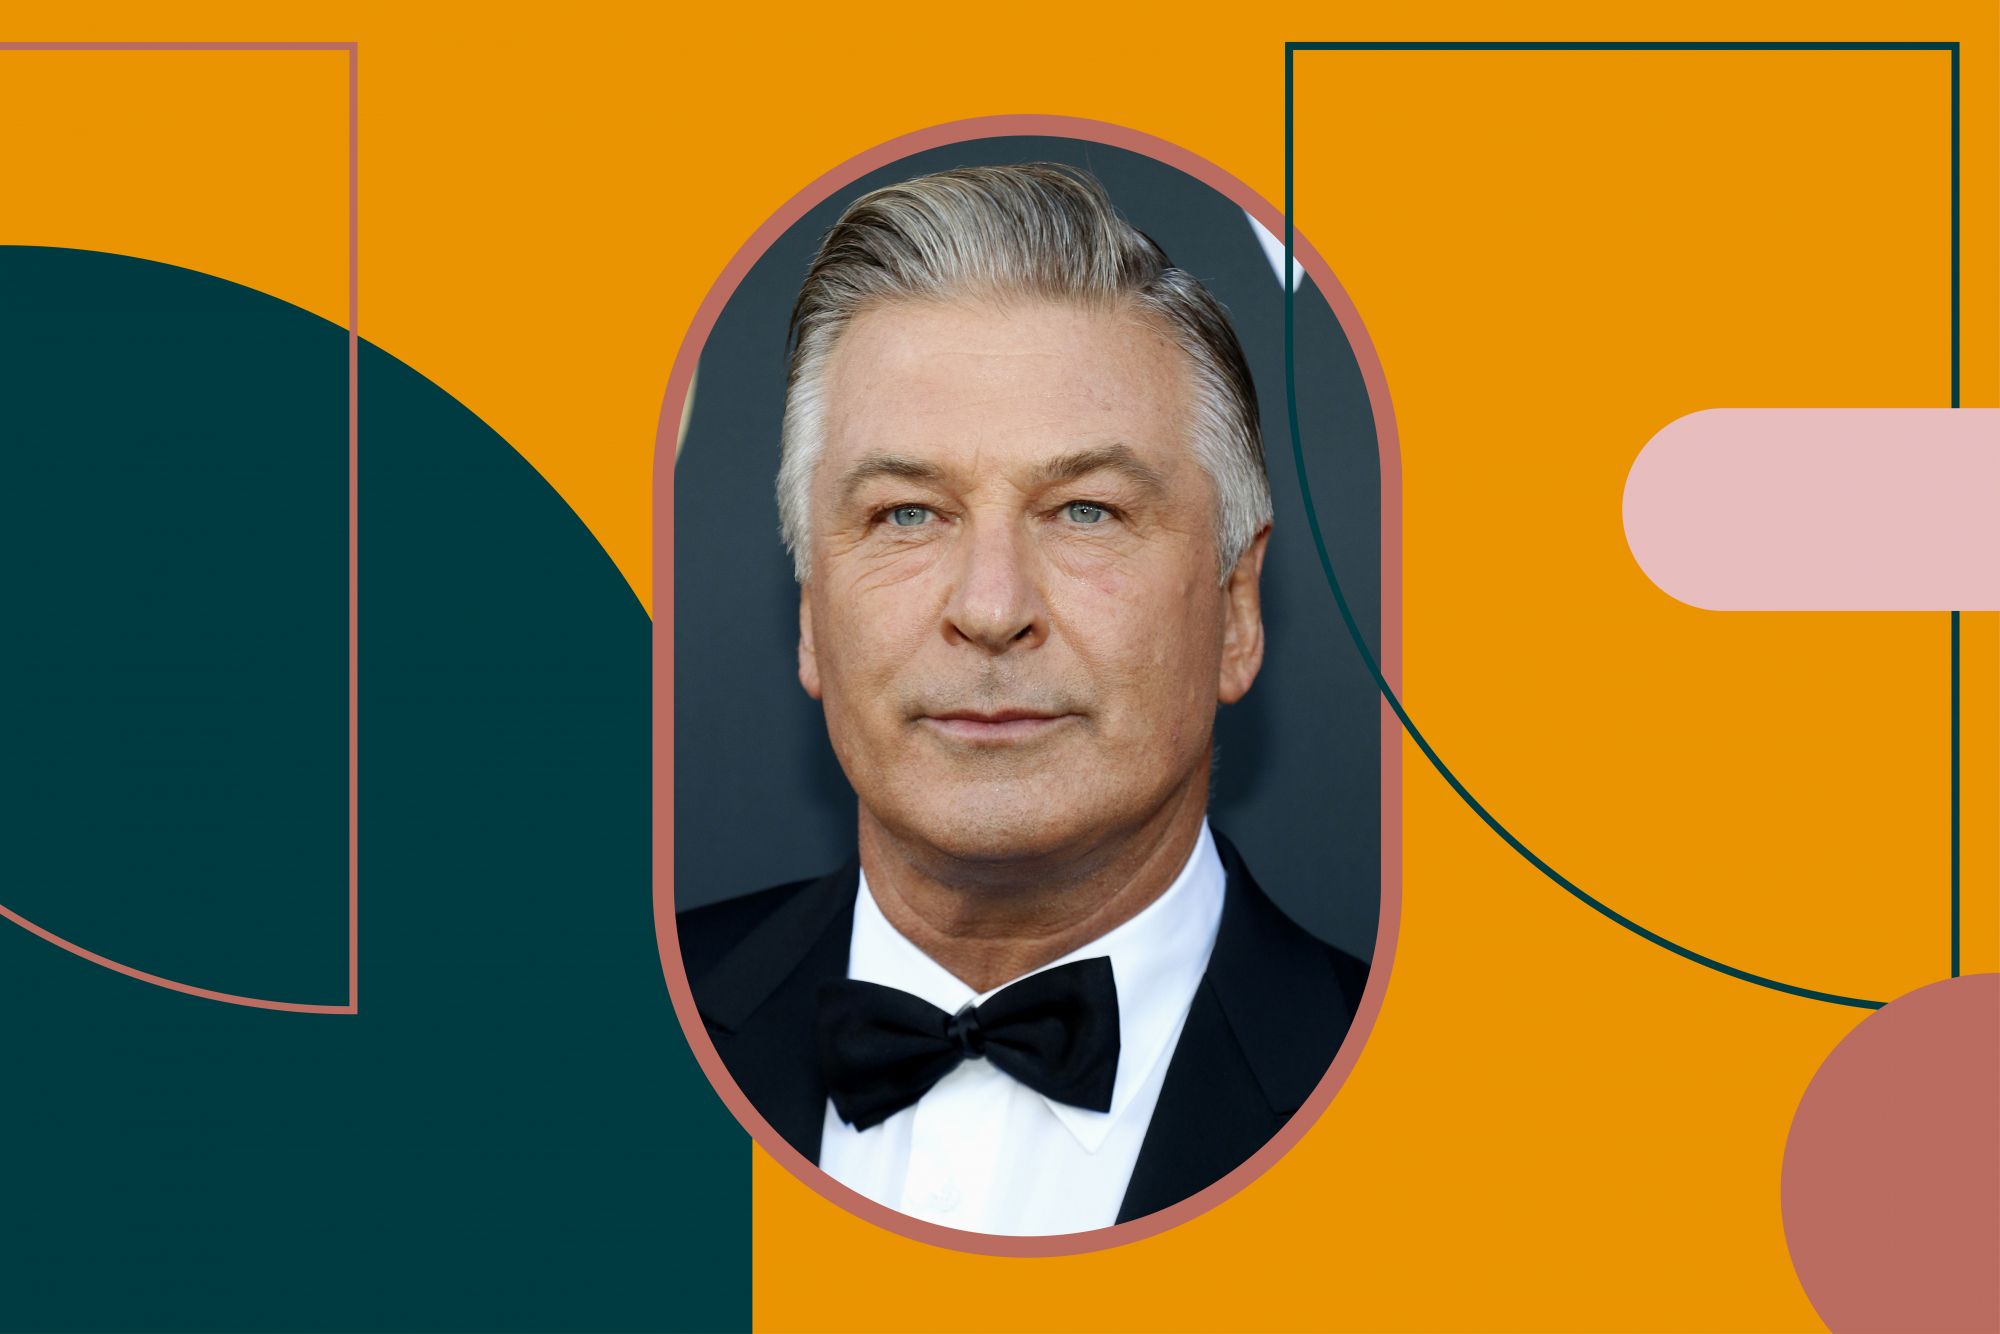 Alec Baldwin at the Comedy Central Roast of Alec Baldwin held at the Saban Theatre in Beverly Hills, USA on September 7, 2019.